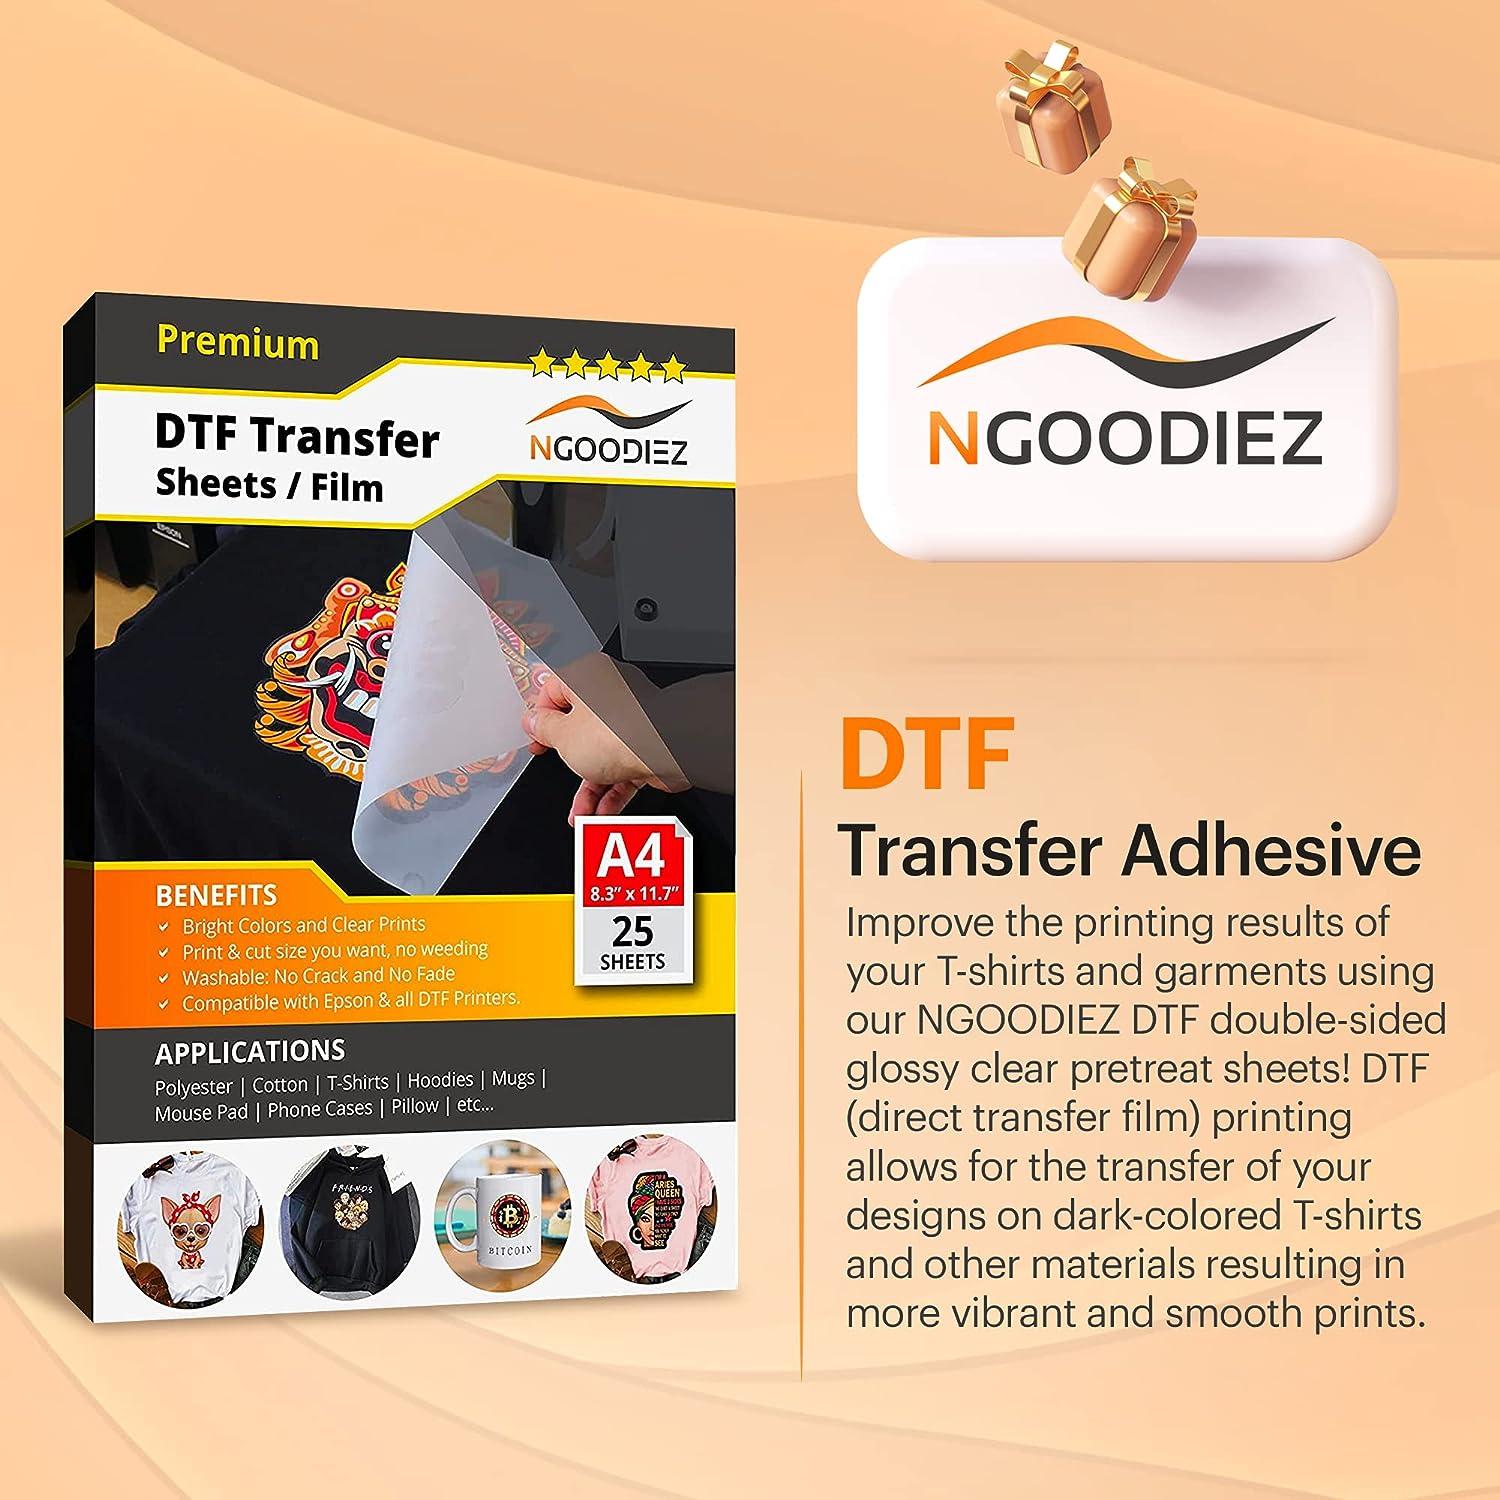 DTF Transfer Film 100 Sheets-A4 PET Heat Transfer Paper for DIY Direct on  T-Shirts.Socks,Bags, 8.3 inch x 11.7 inch